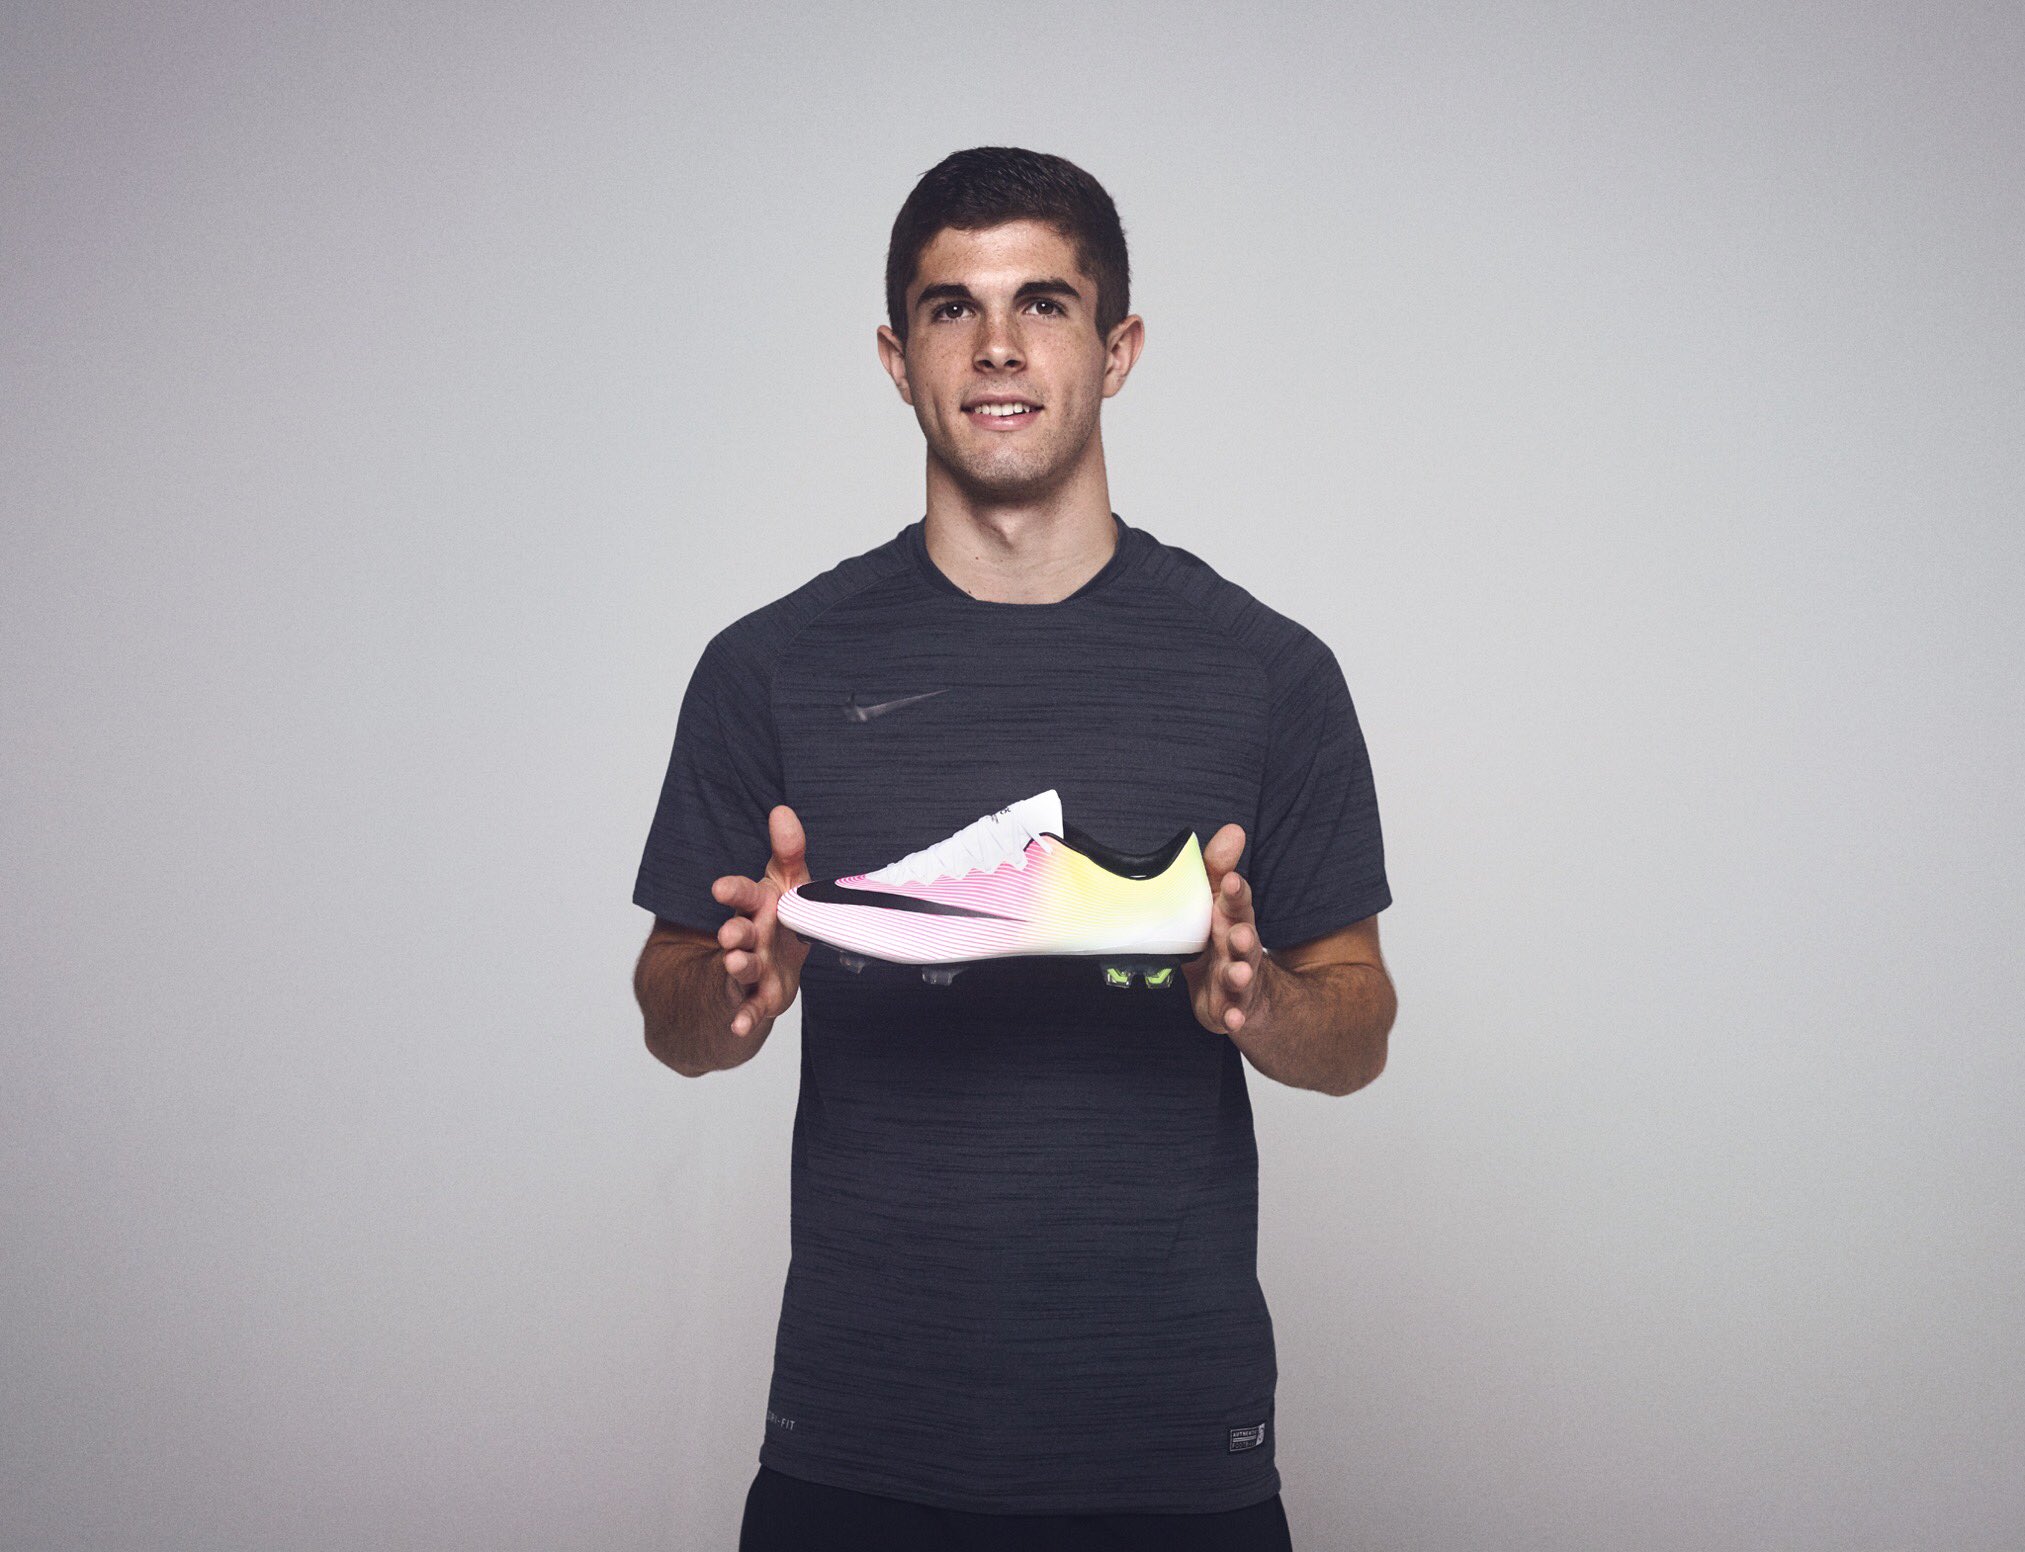 Christian Pulisic on Twitter: "Ready for #derbytime tomorrow #nike #